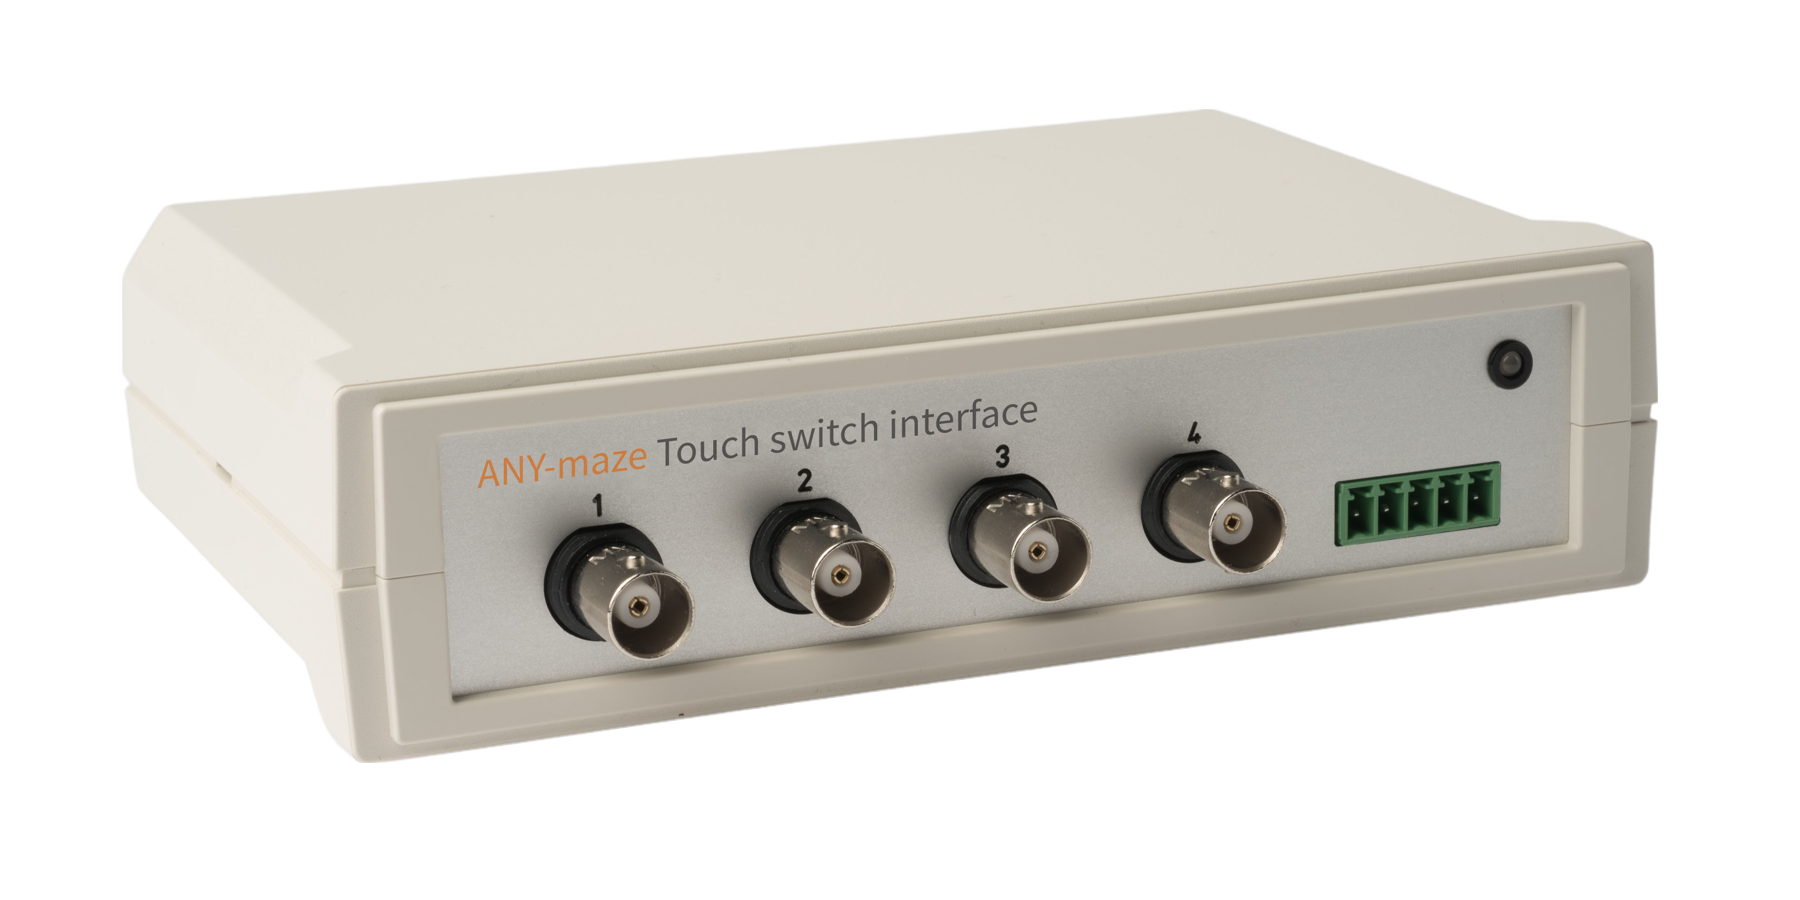 The ANY-maze Touch switch interface picture